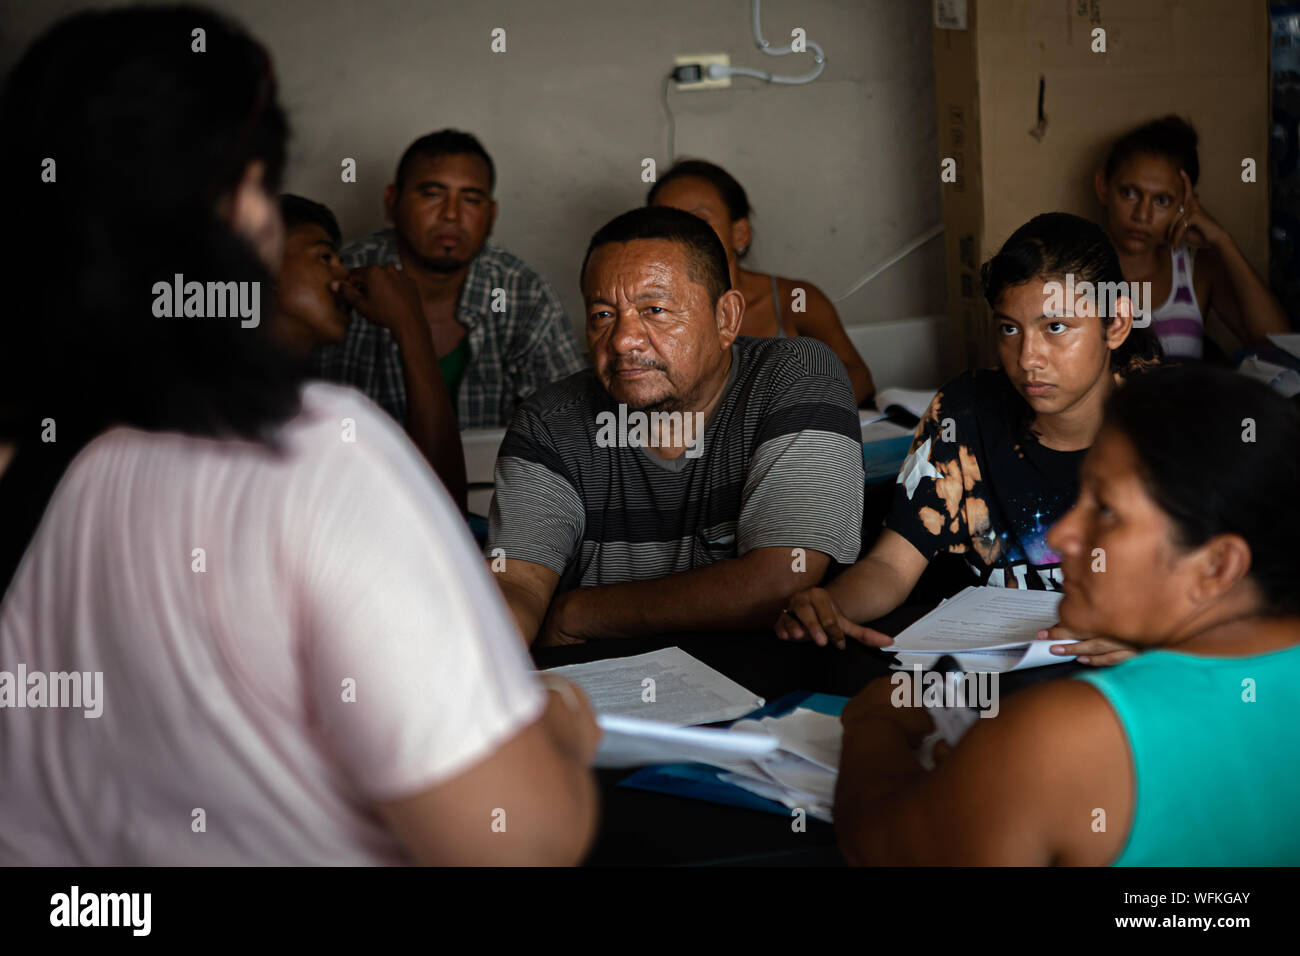 Matamoros, Mexico. 24th Aug, 2019. Immigration lawyers working with the Atlanta-based group Lawyers for Good Government, attempted to inform hundreds of asylum seekers of their legal rights after they had been sent back to Matamoros, as part of the Trump's 'Remain in Mexico' program. (Photo by Rana Sajid Hussain/Pacific Press) Credit: Pacific Press Agency/Alamy Live News Stock Photo